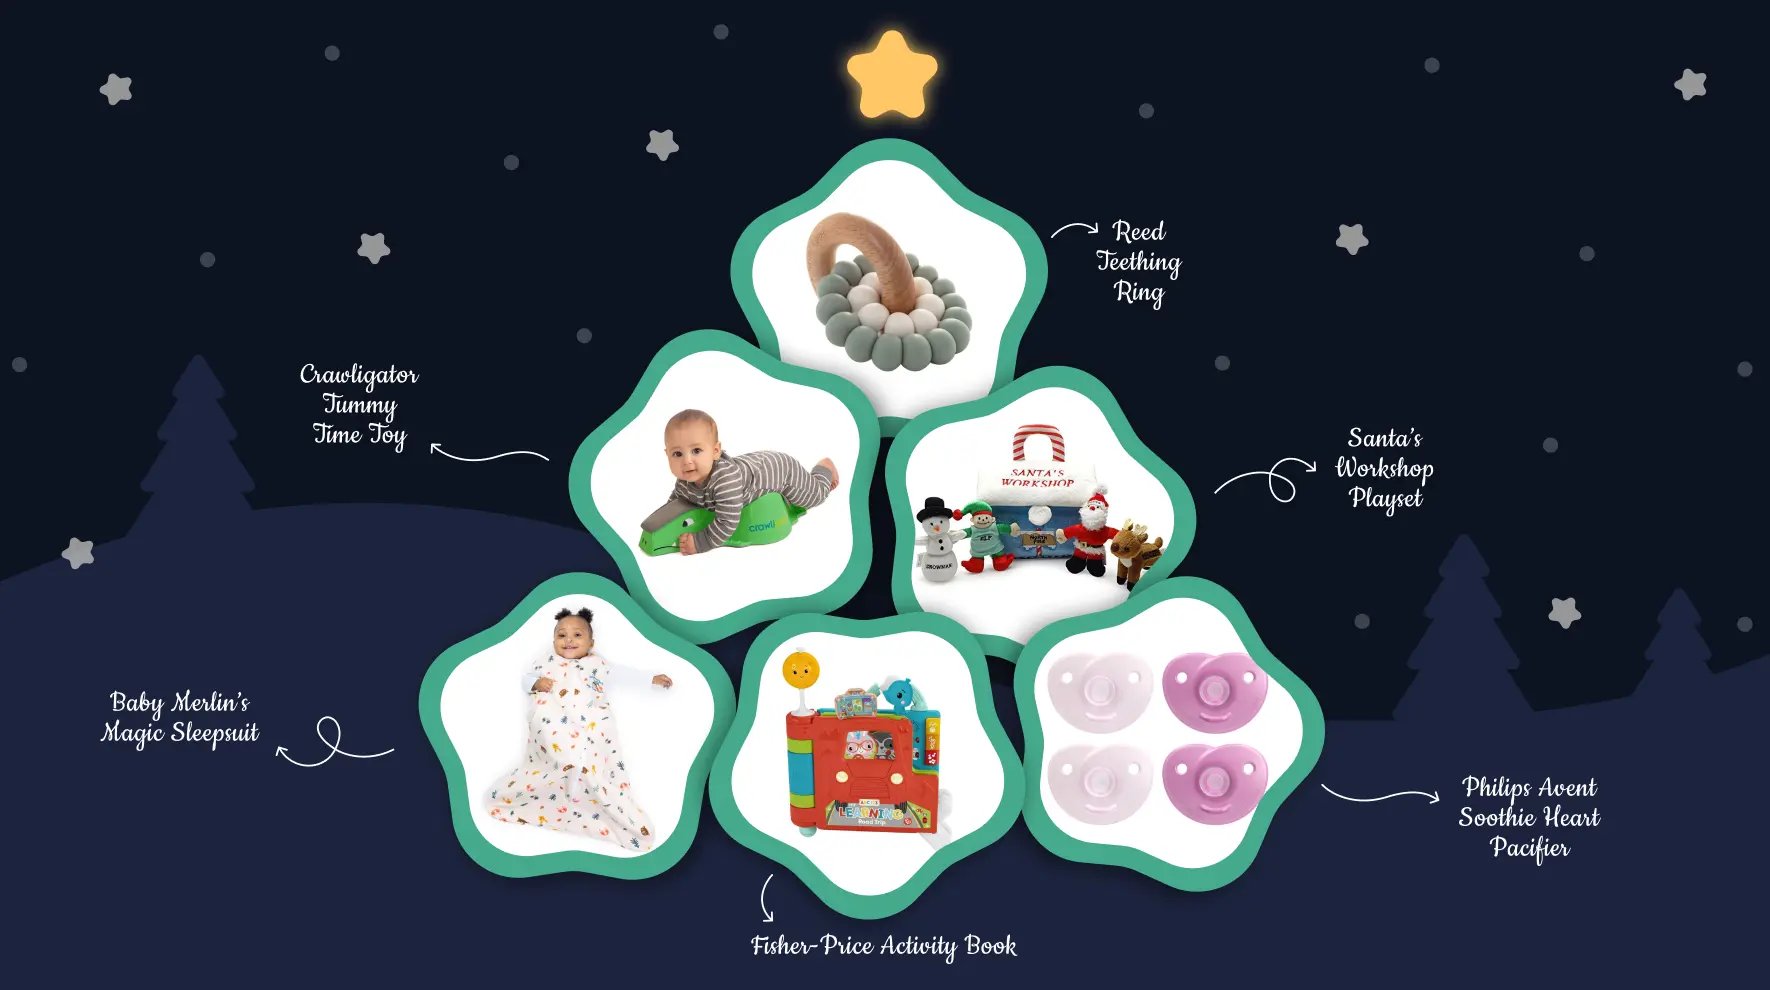 Newborn baby gifts: The holiday edition